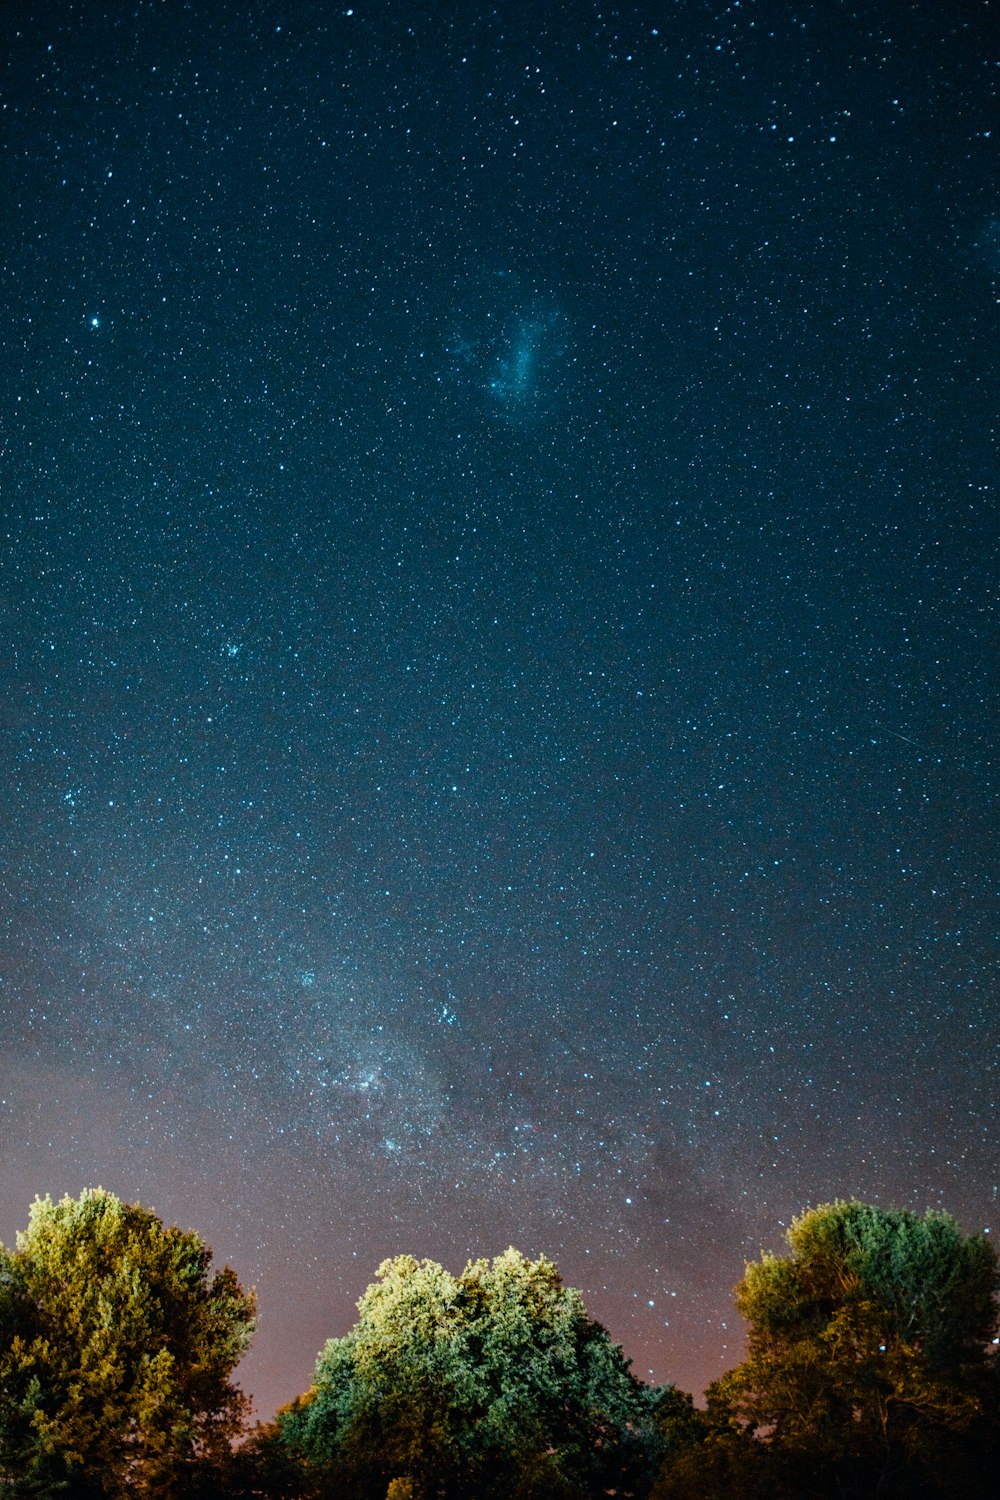 green trees under blue sky with stars